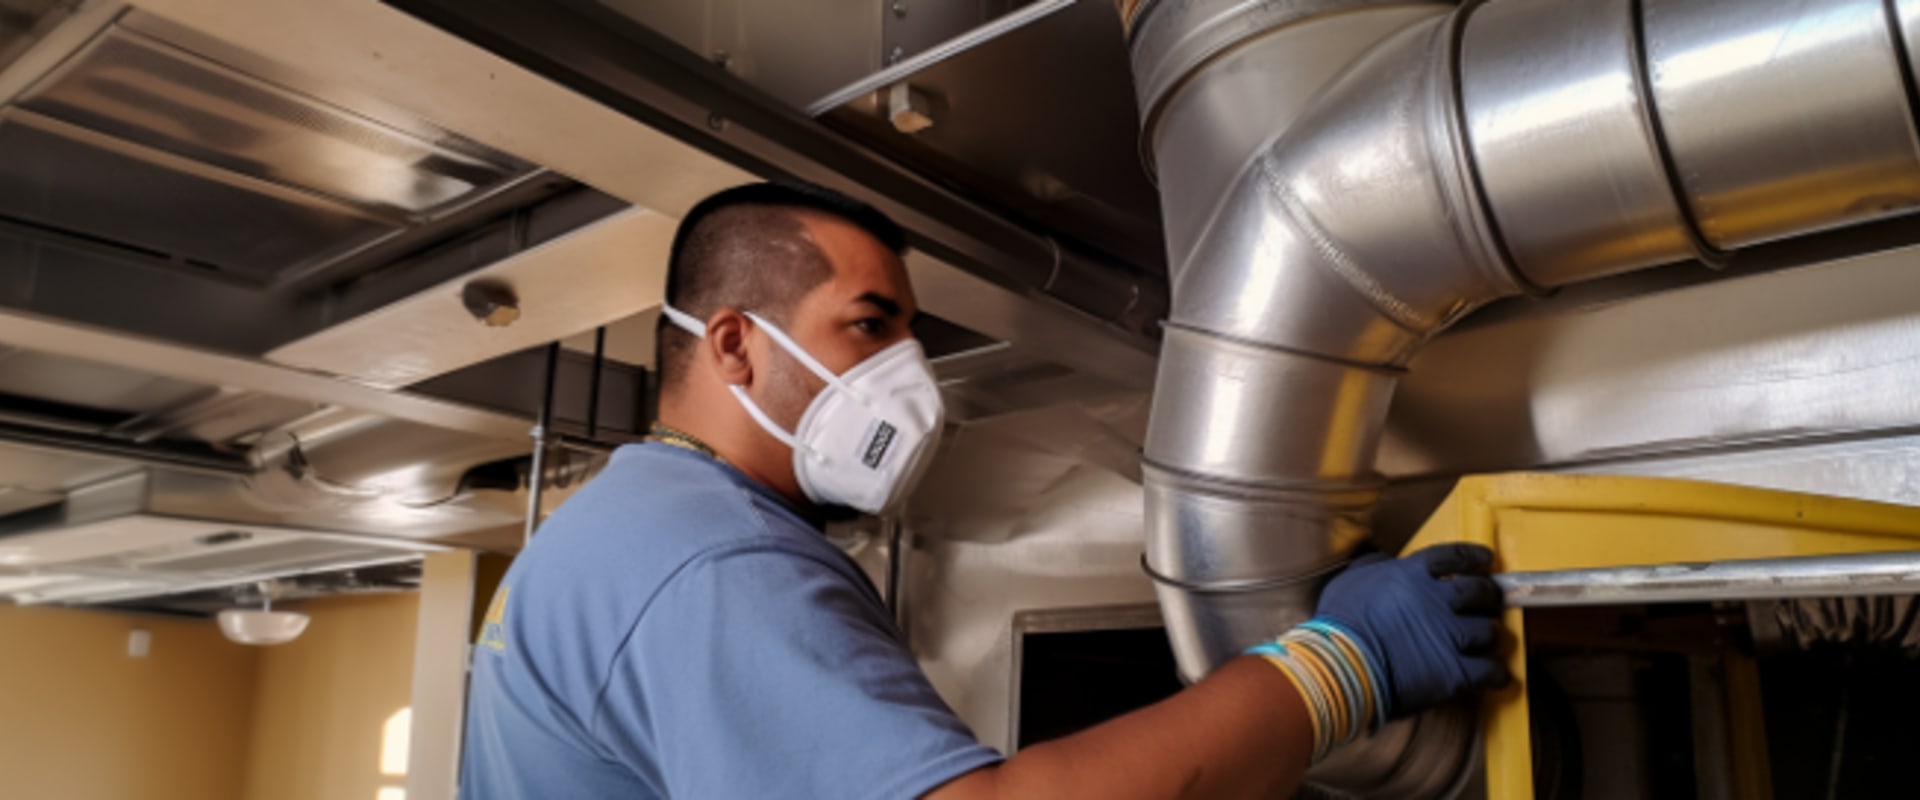 Elevate Your Home with Duct Cleaning Services in Hialeah FL